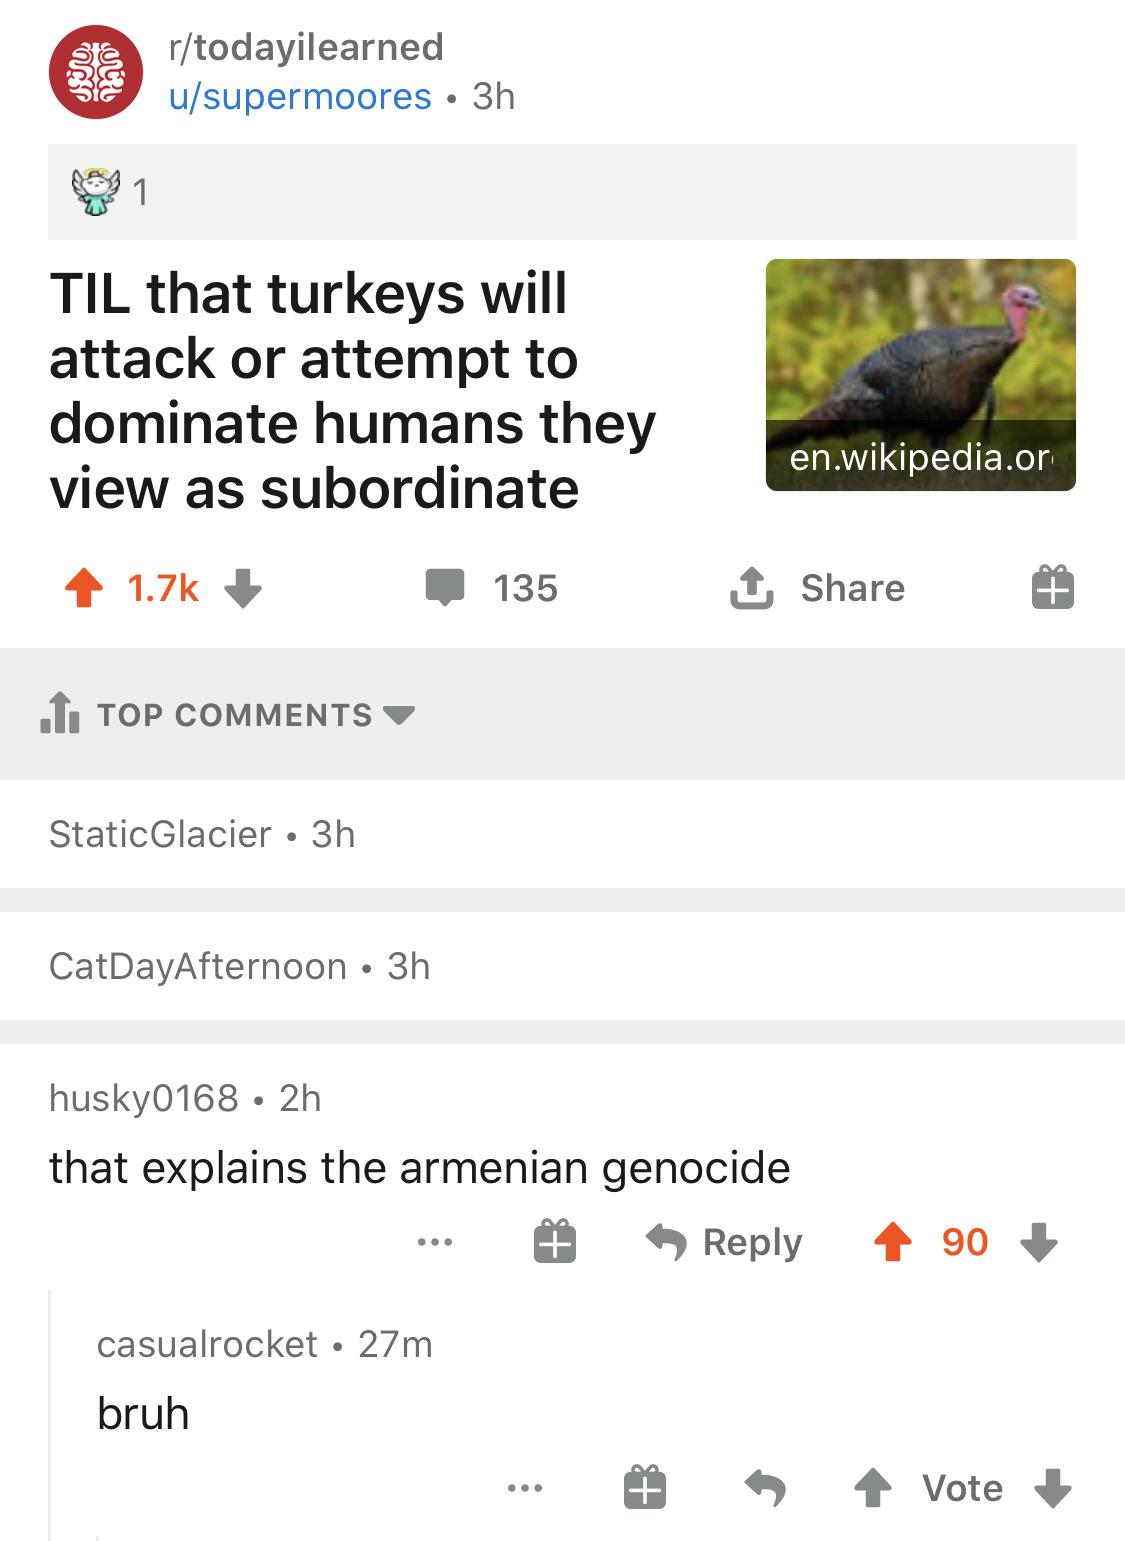 History, Turkey, Turkish, Armenian, Armenians, Germany History Memes History, Turkey, Turkish, Armenian, Armenians, Germany text: r/todayilearned u/supermoores • 3h TIL that turkeys will attack or attempt to dominate humans they view as subordinate 135 , TOP COMMENTS StaticGlacier • 3h CatDayAfternoon • 3h husky0168 • 2h en.wikipedia.or Share that explains the armenian genocide e 9 Reply casualrocket • 27m bruh 90 